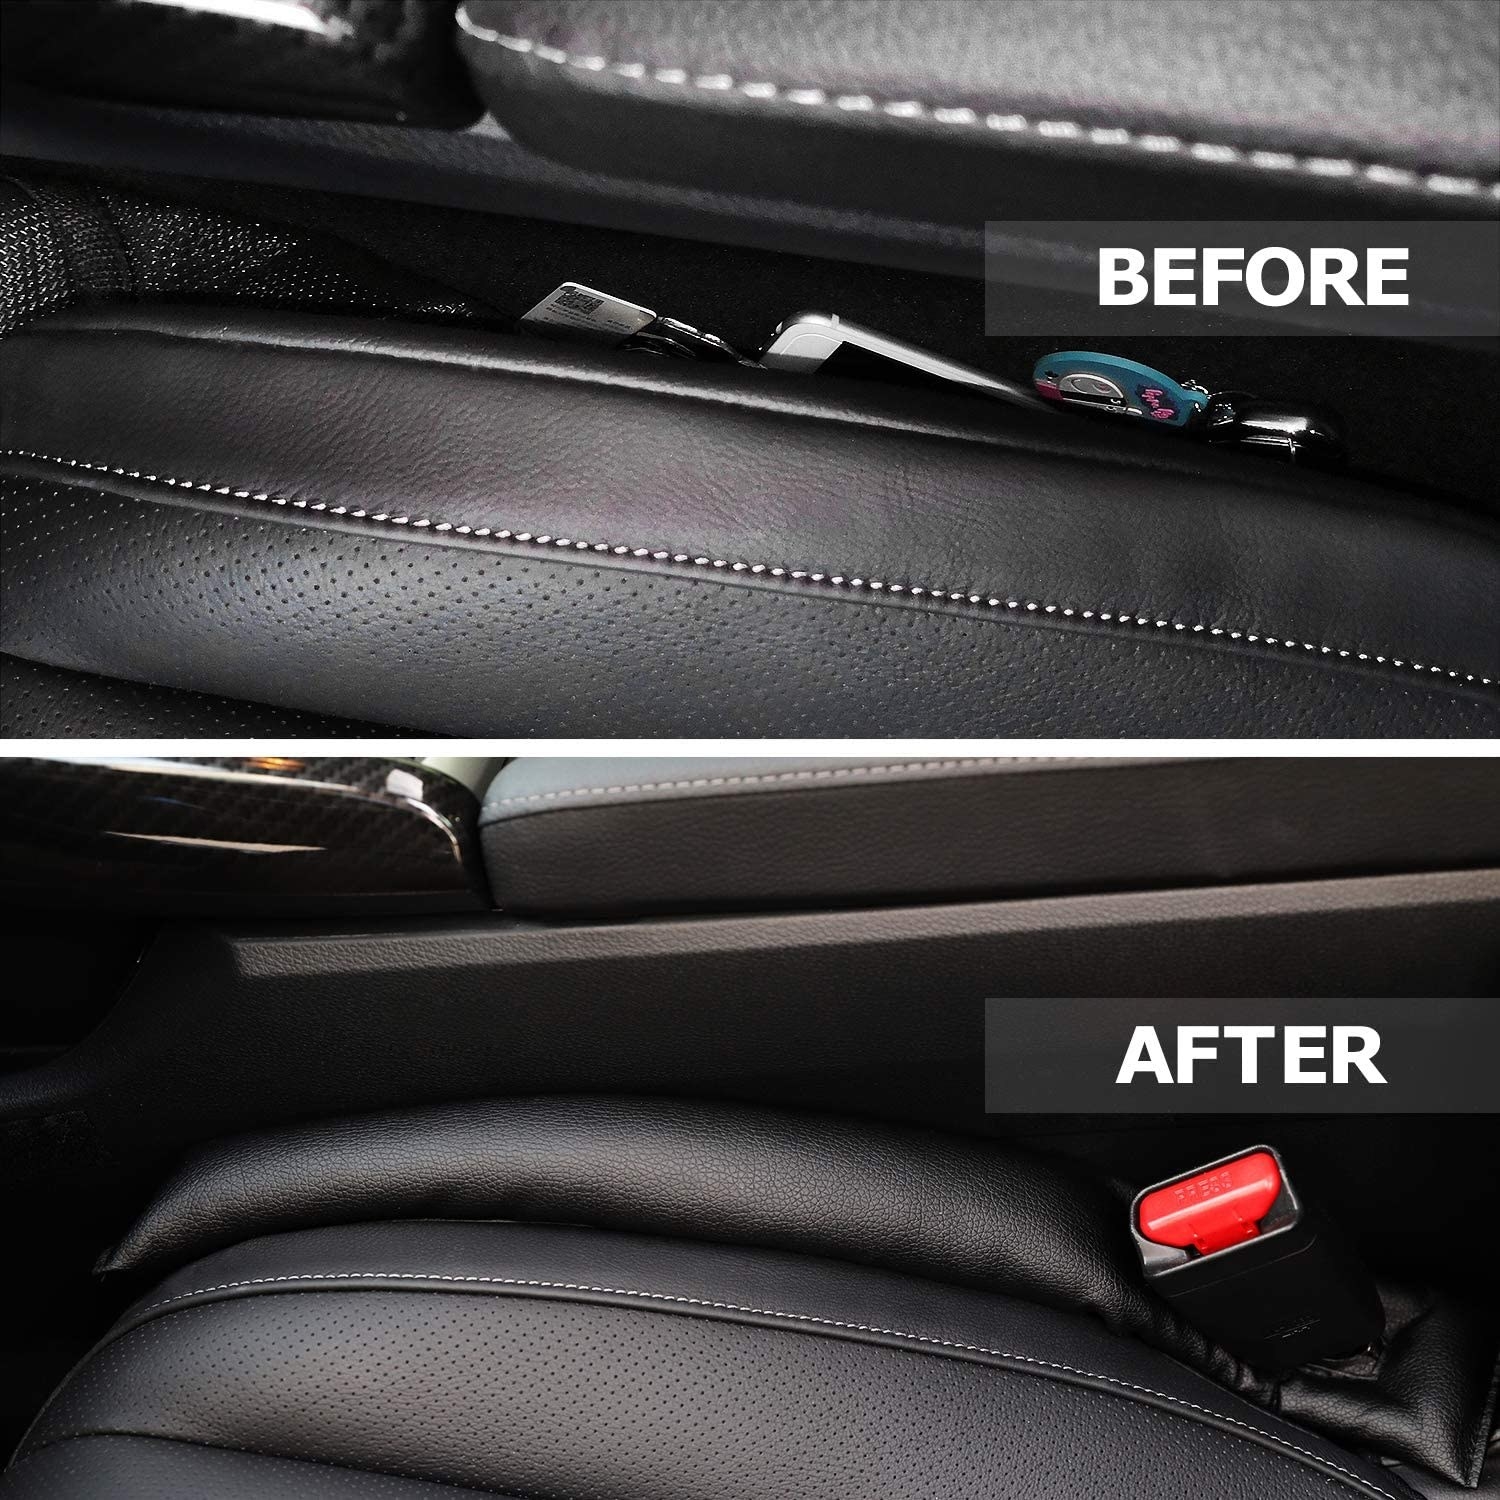 a before and after of the gap fillers in a car